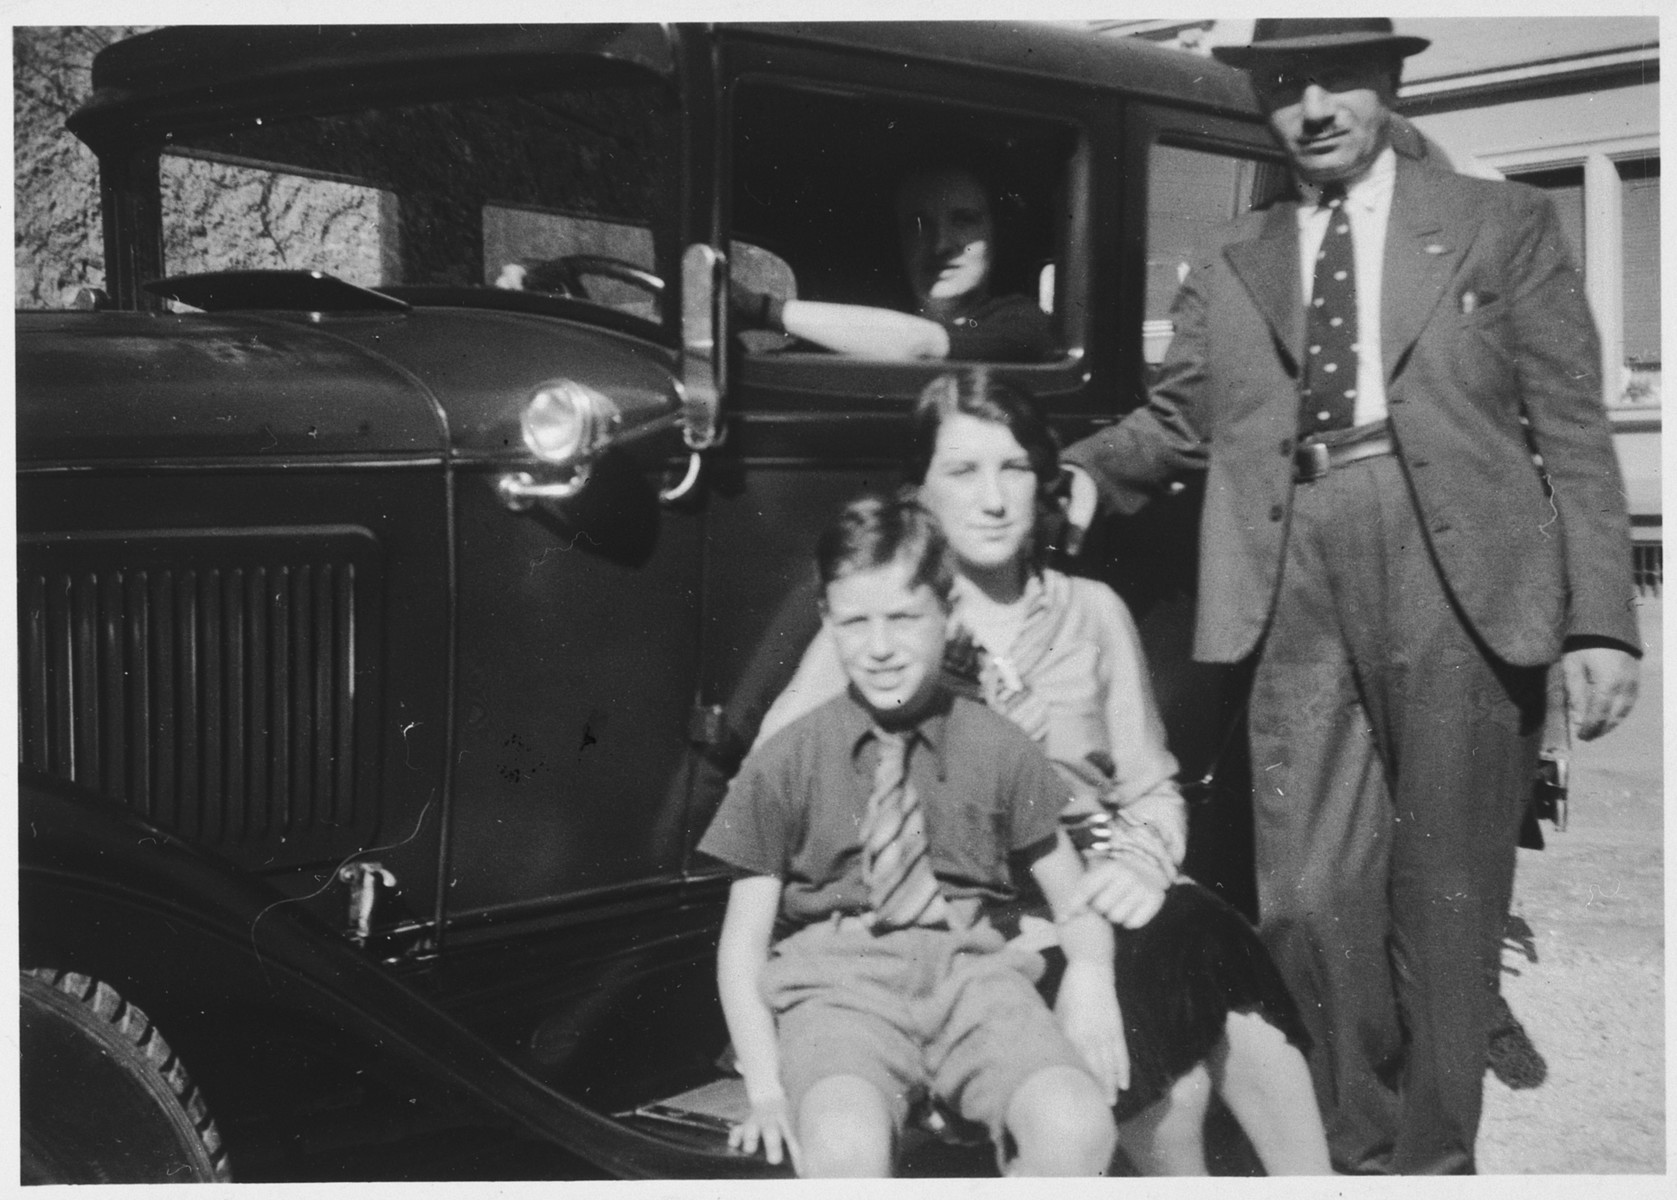 David and Paula Schwab pose in front of a car with their two children Gerd and Margot.